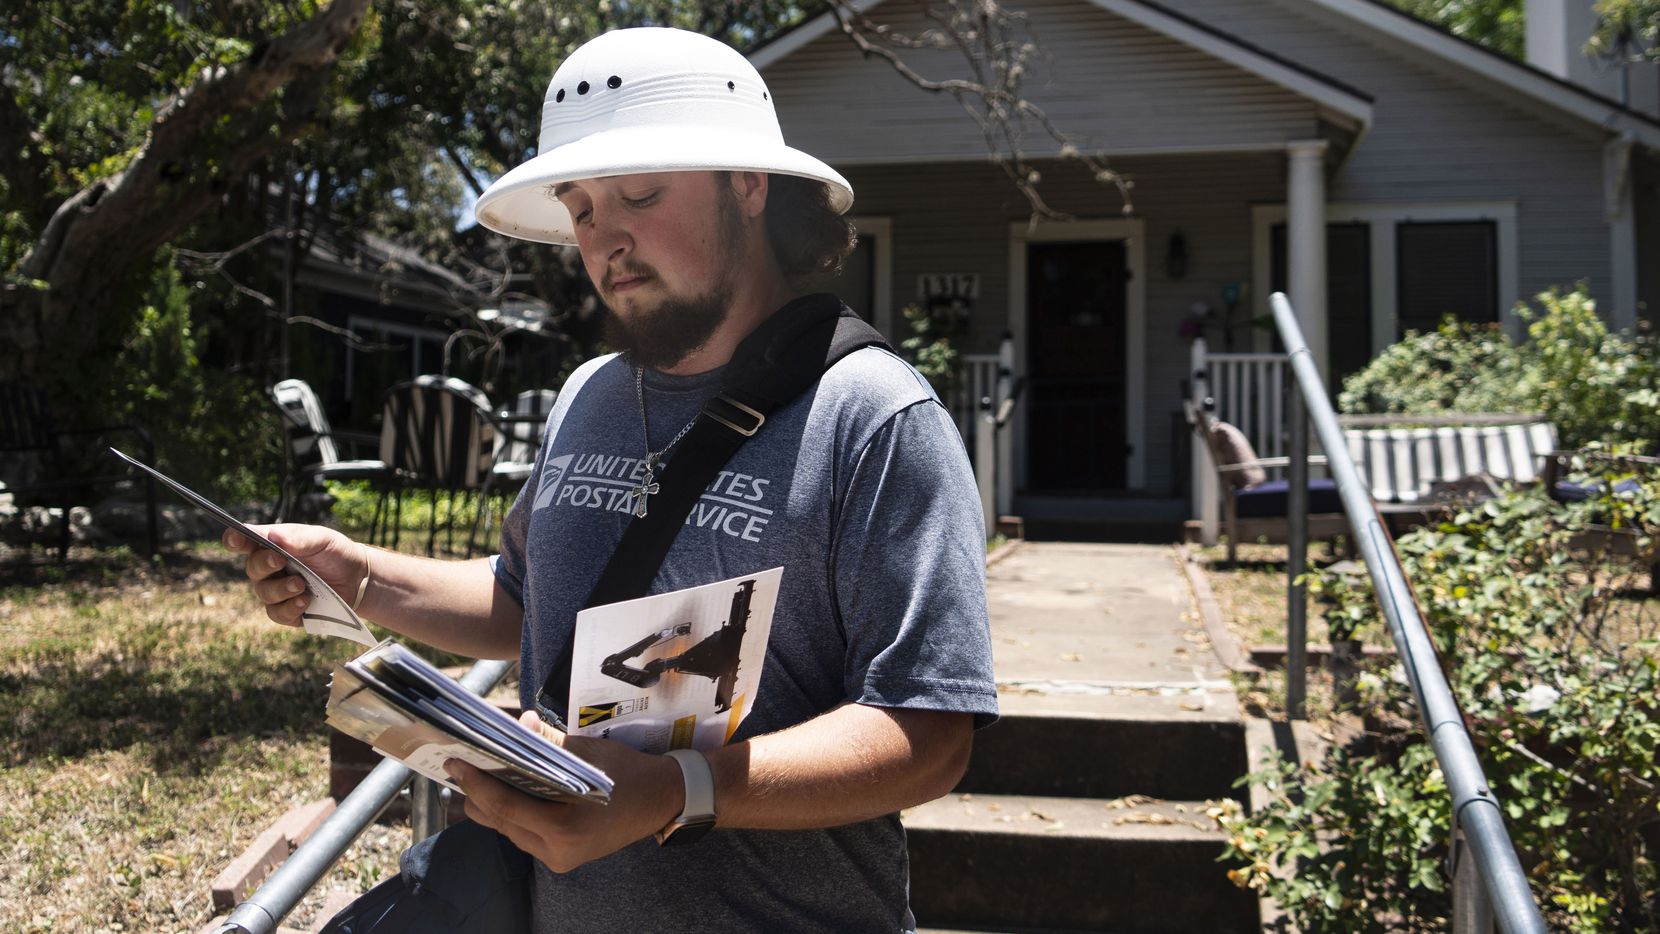 Mailman Rhett Hanes wears a safety hat to protect from hawk attacks while delivering mail on...